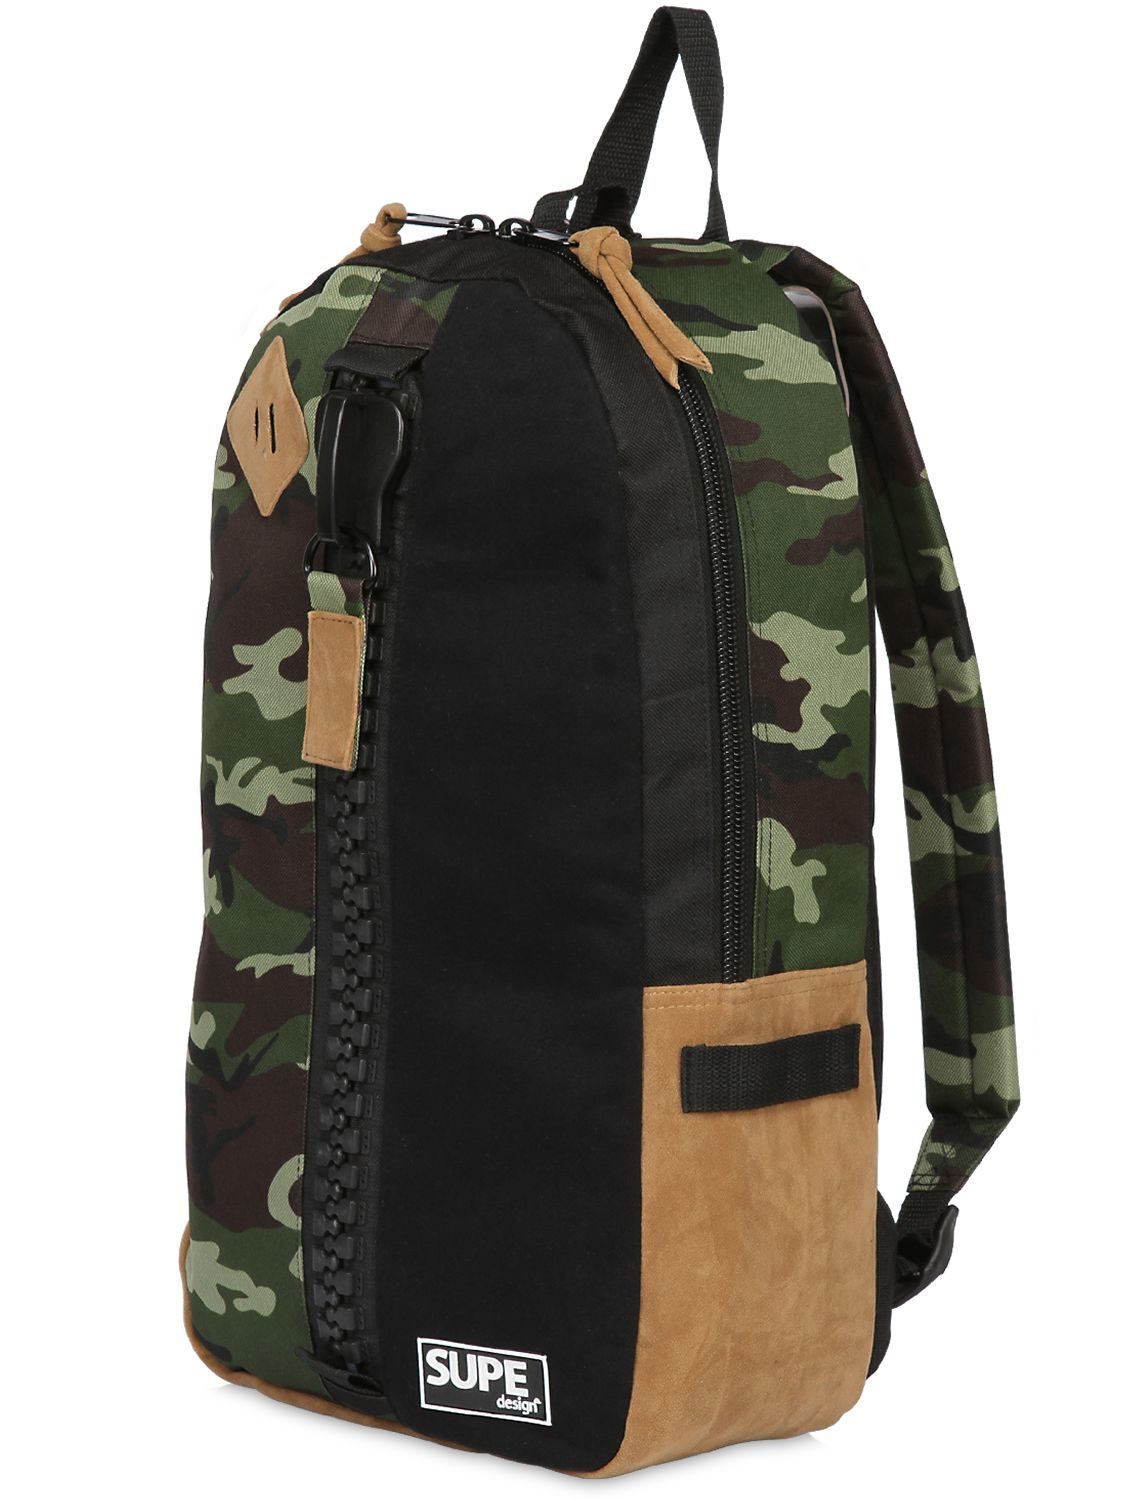 Lyst - Supe Design Day Camo Printed Canvas Backpack in Green for Men